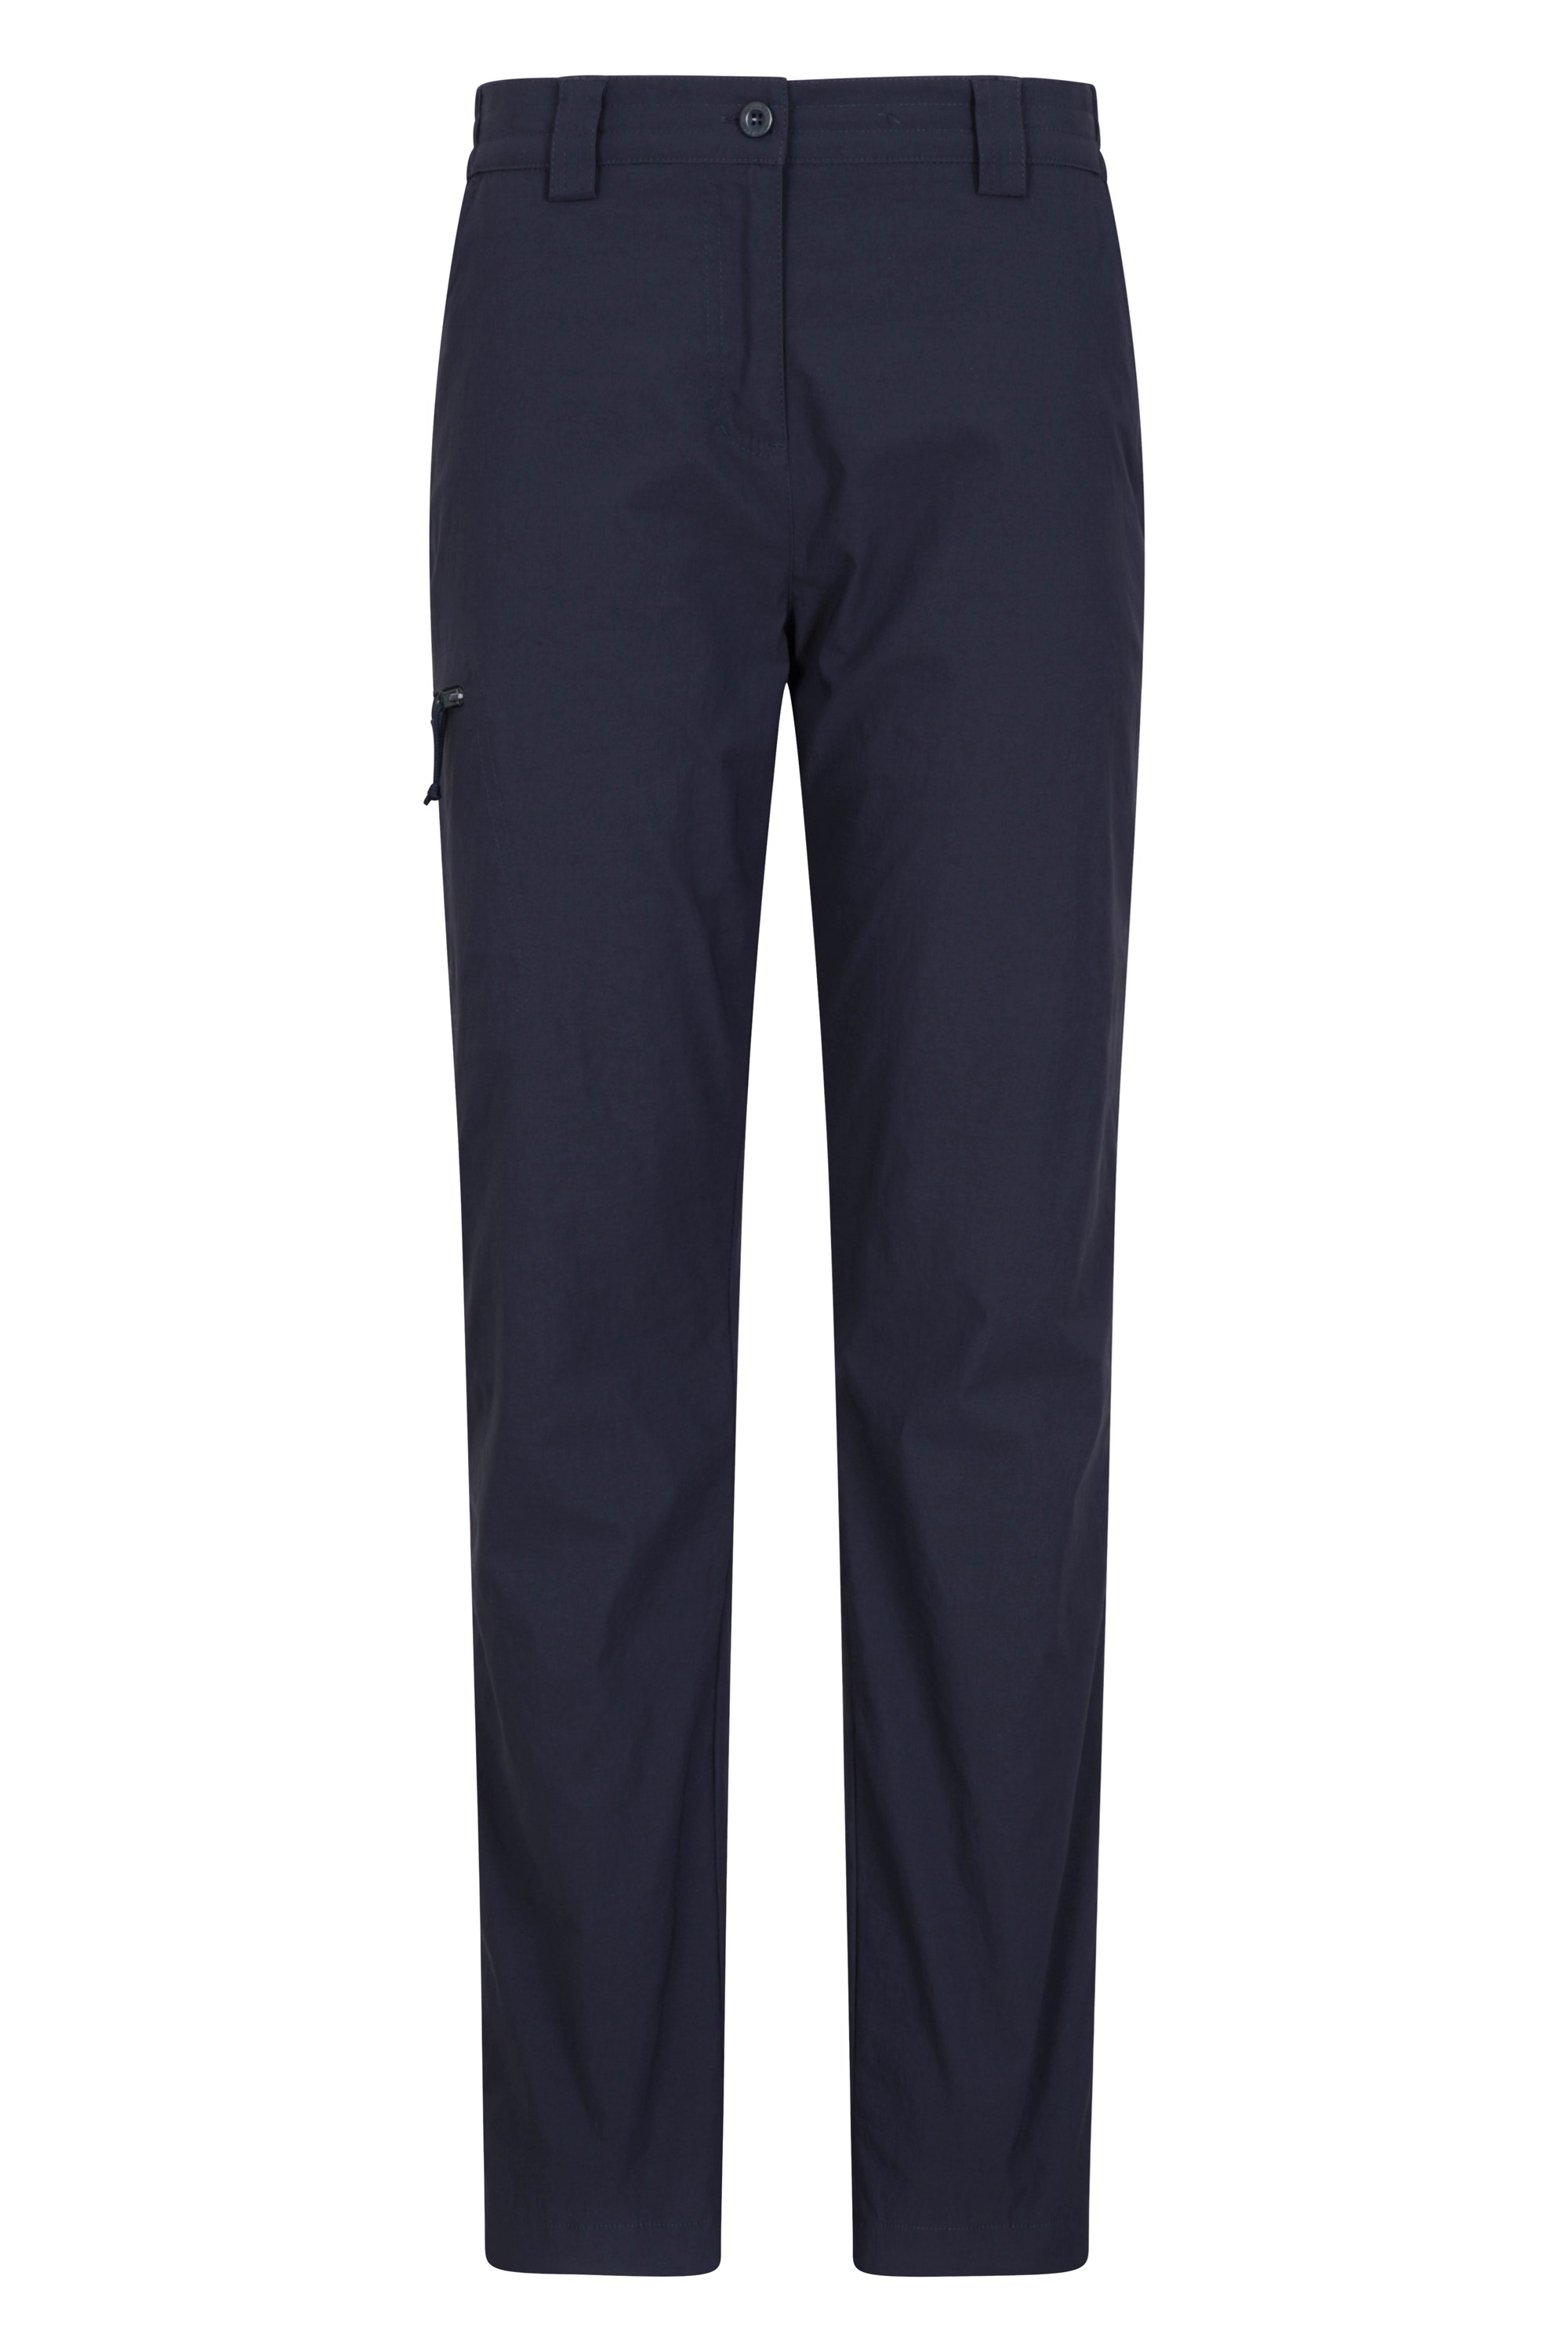 Winter Hiker Stretch Womens Trousers - Navy